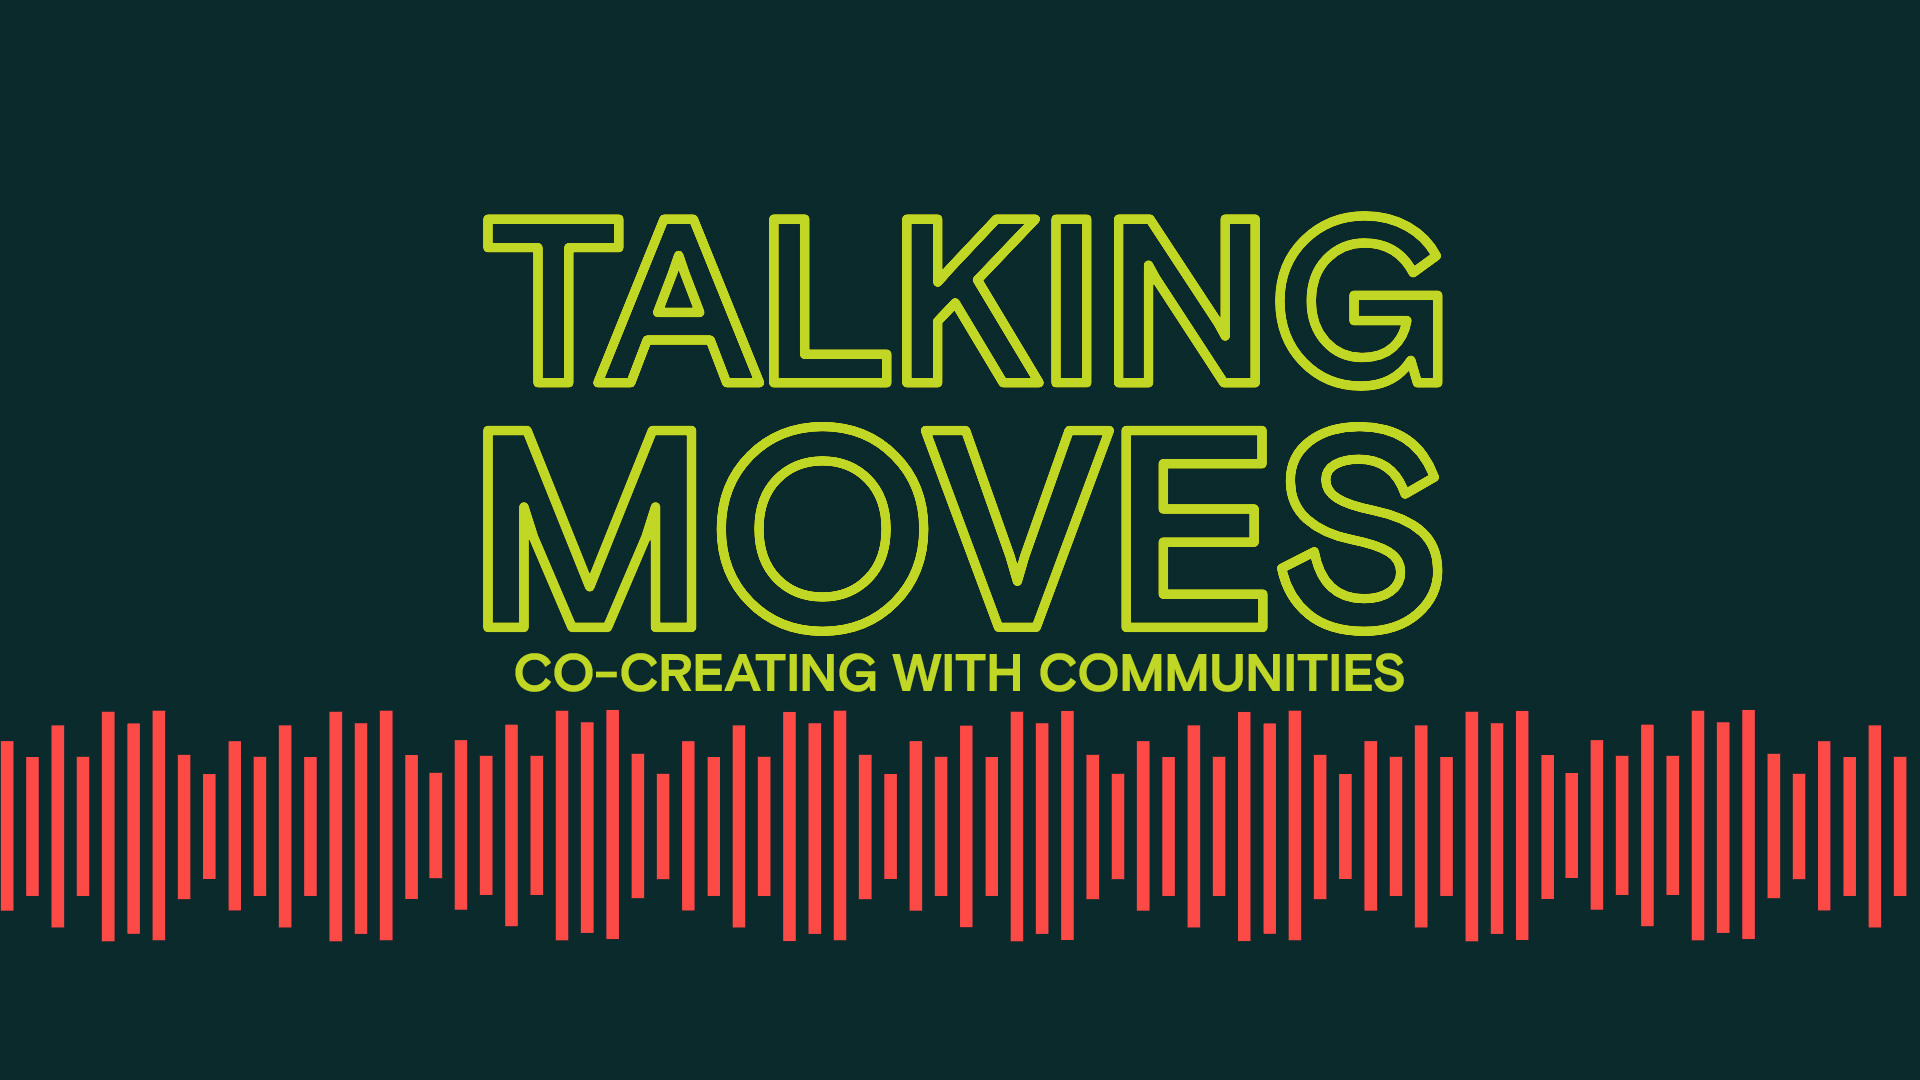 Co-creating with Communities - Talking Moves podcast title